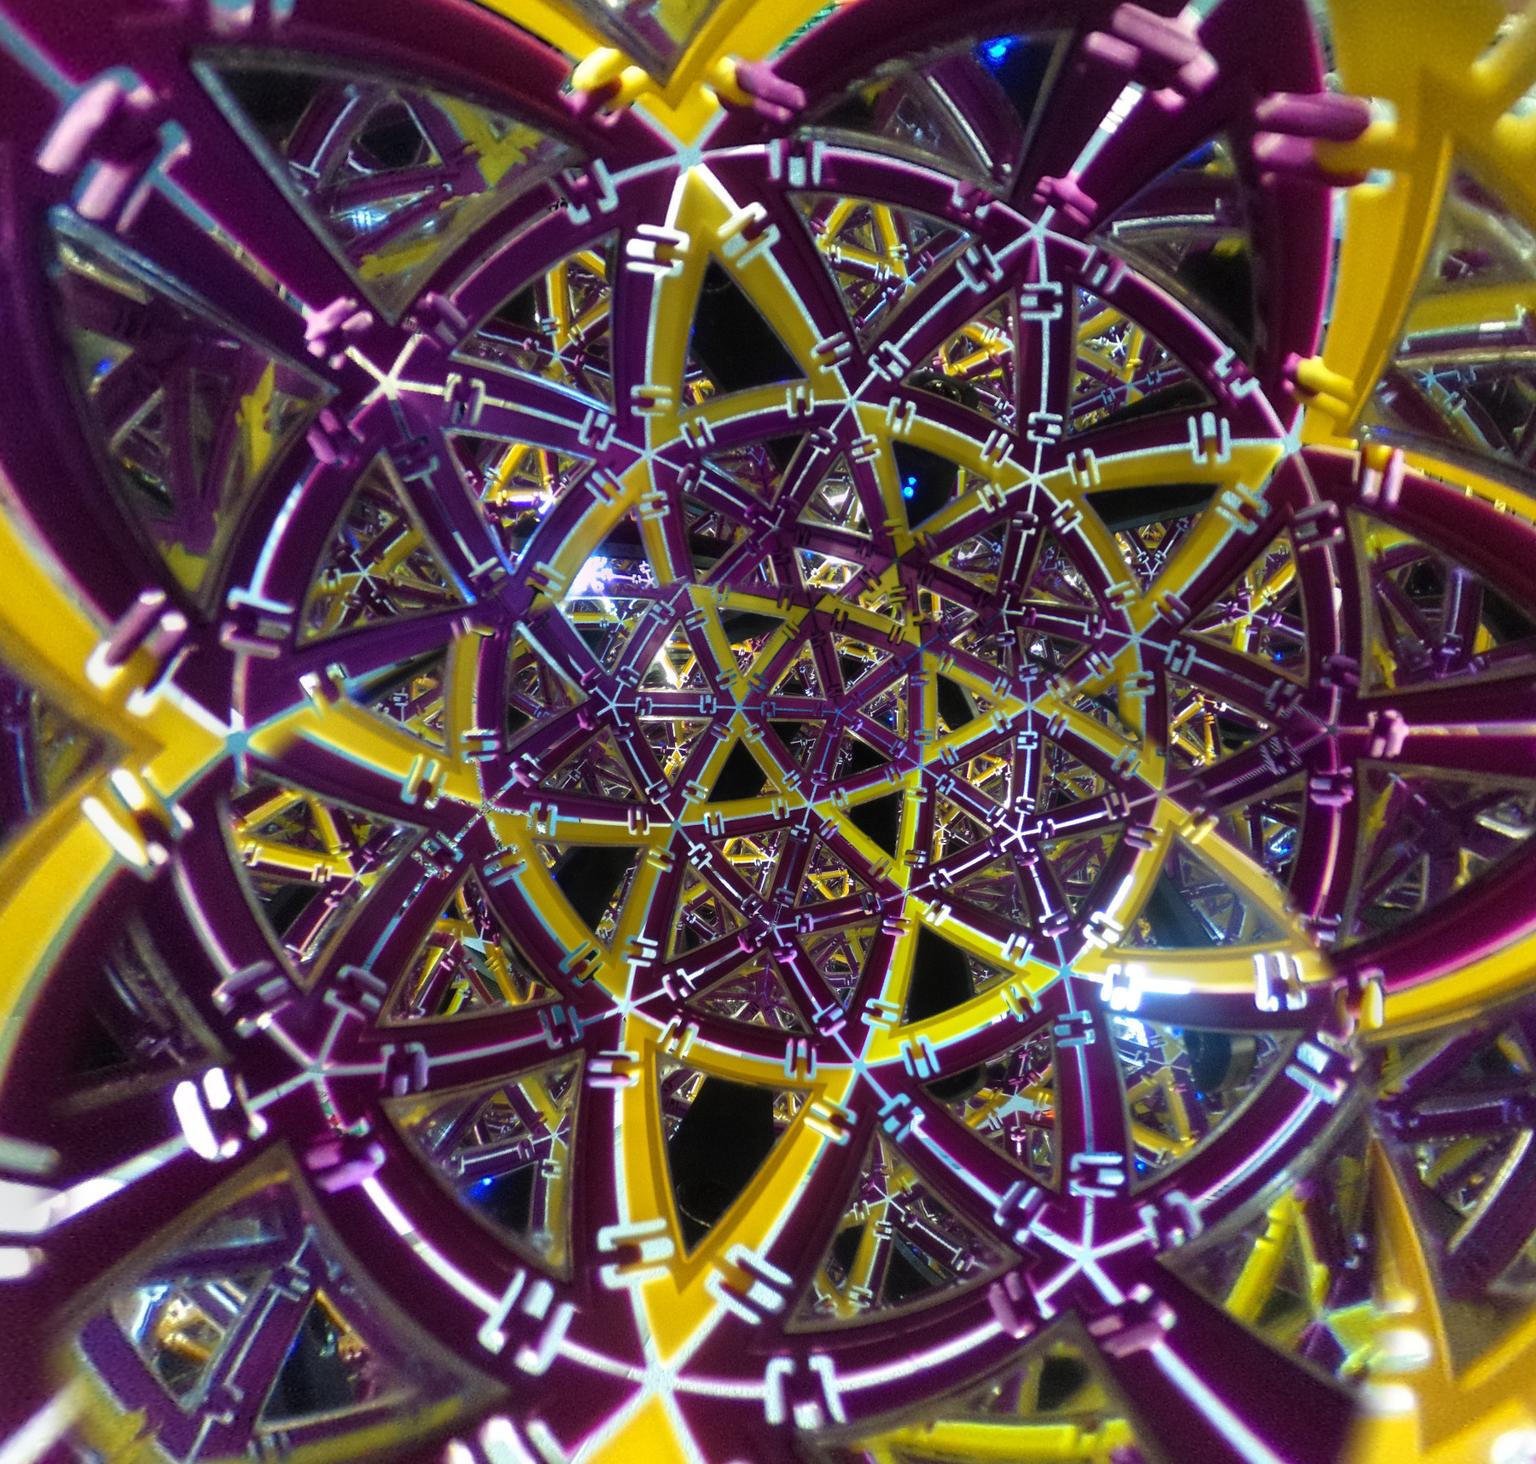 Image for entry 'Patterned icosahedron'